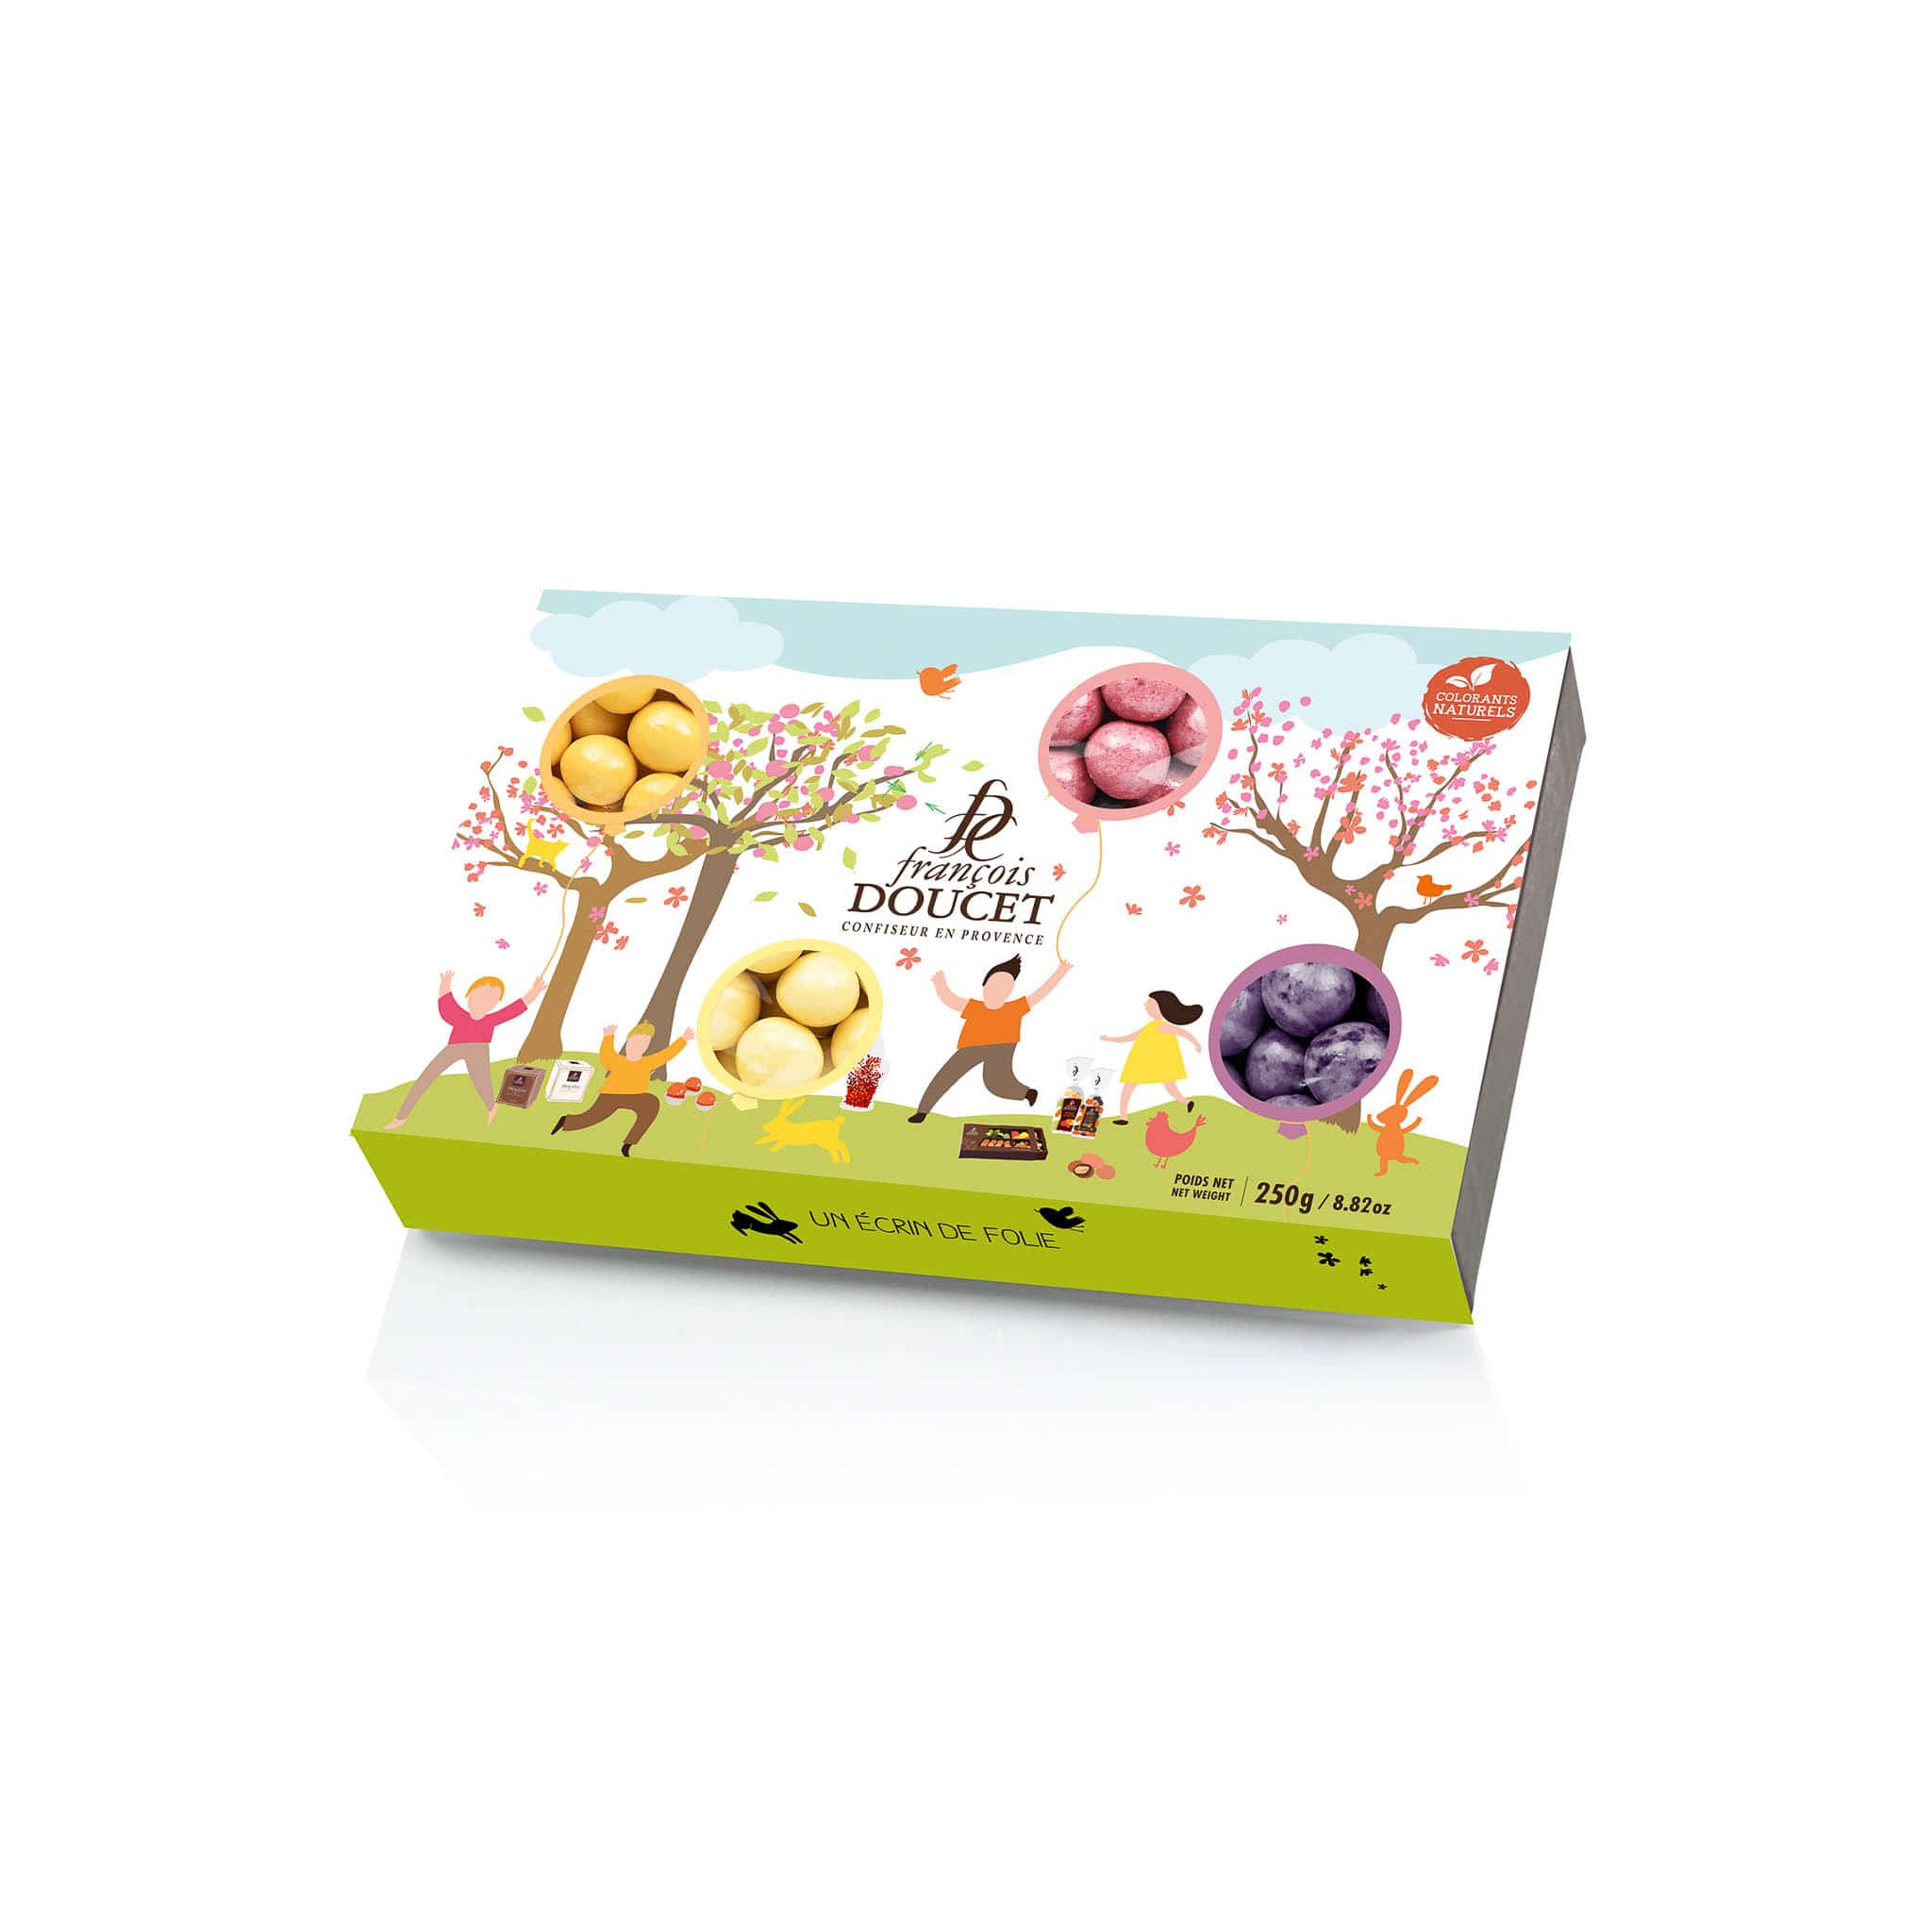 Francois Doucet Selection of Easter Sweets, 250g